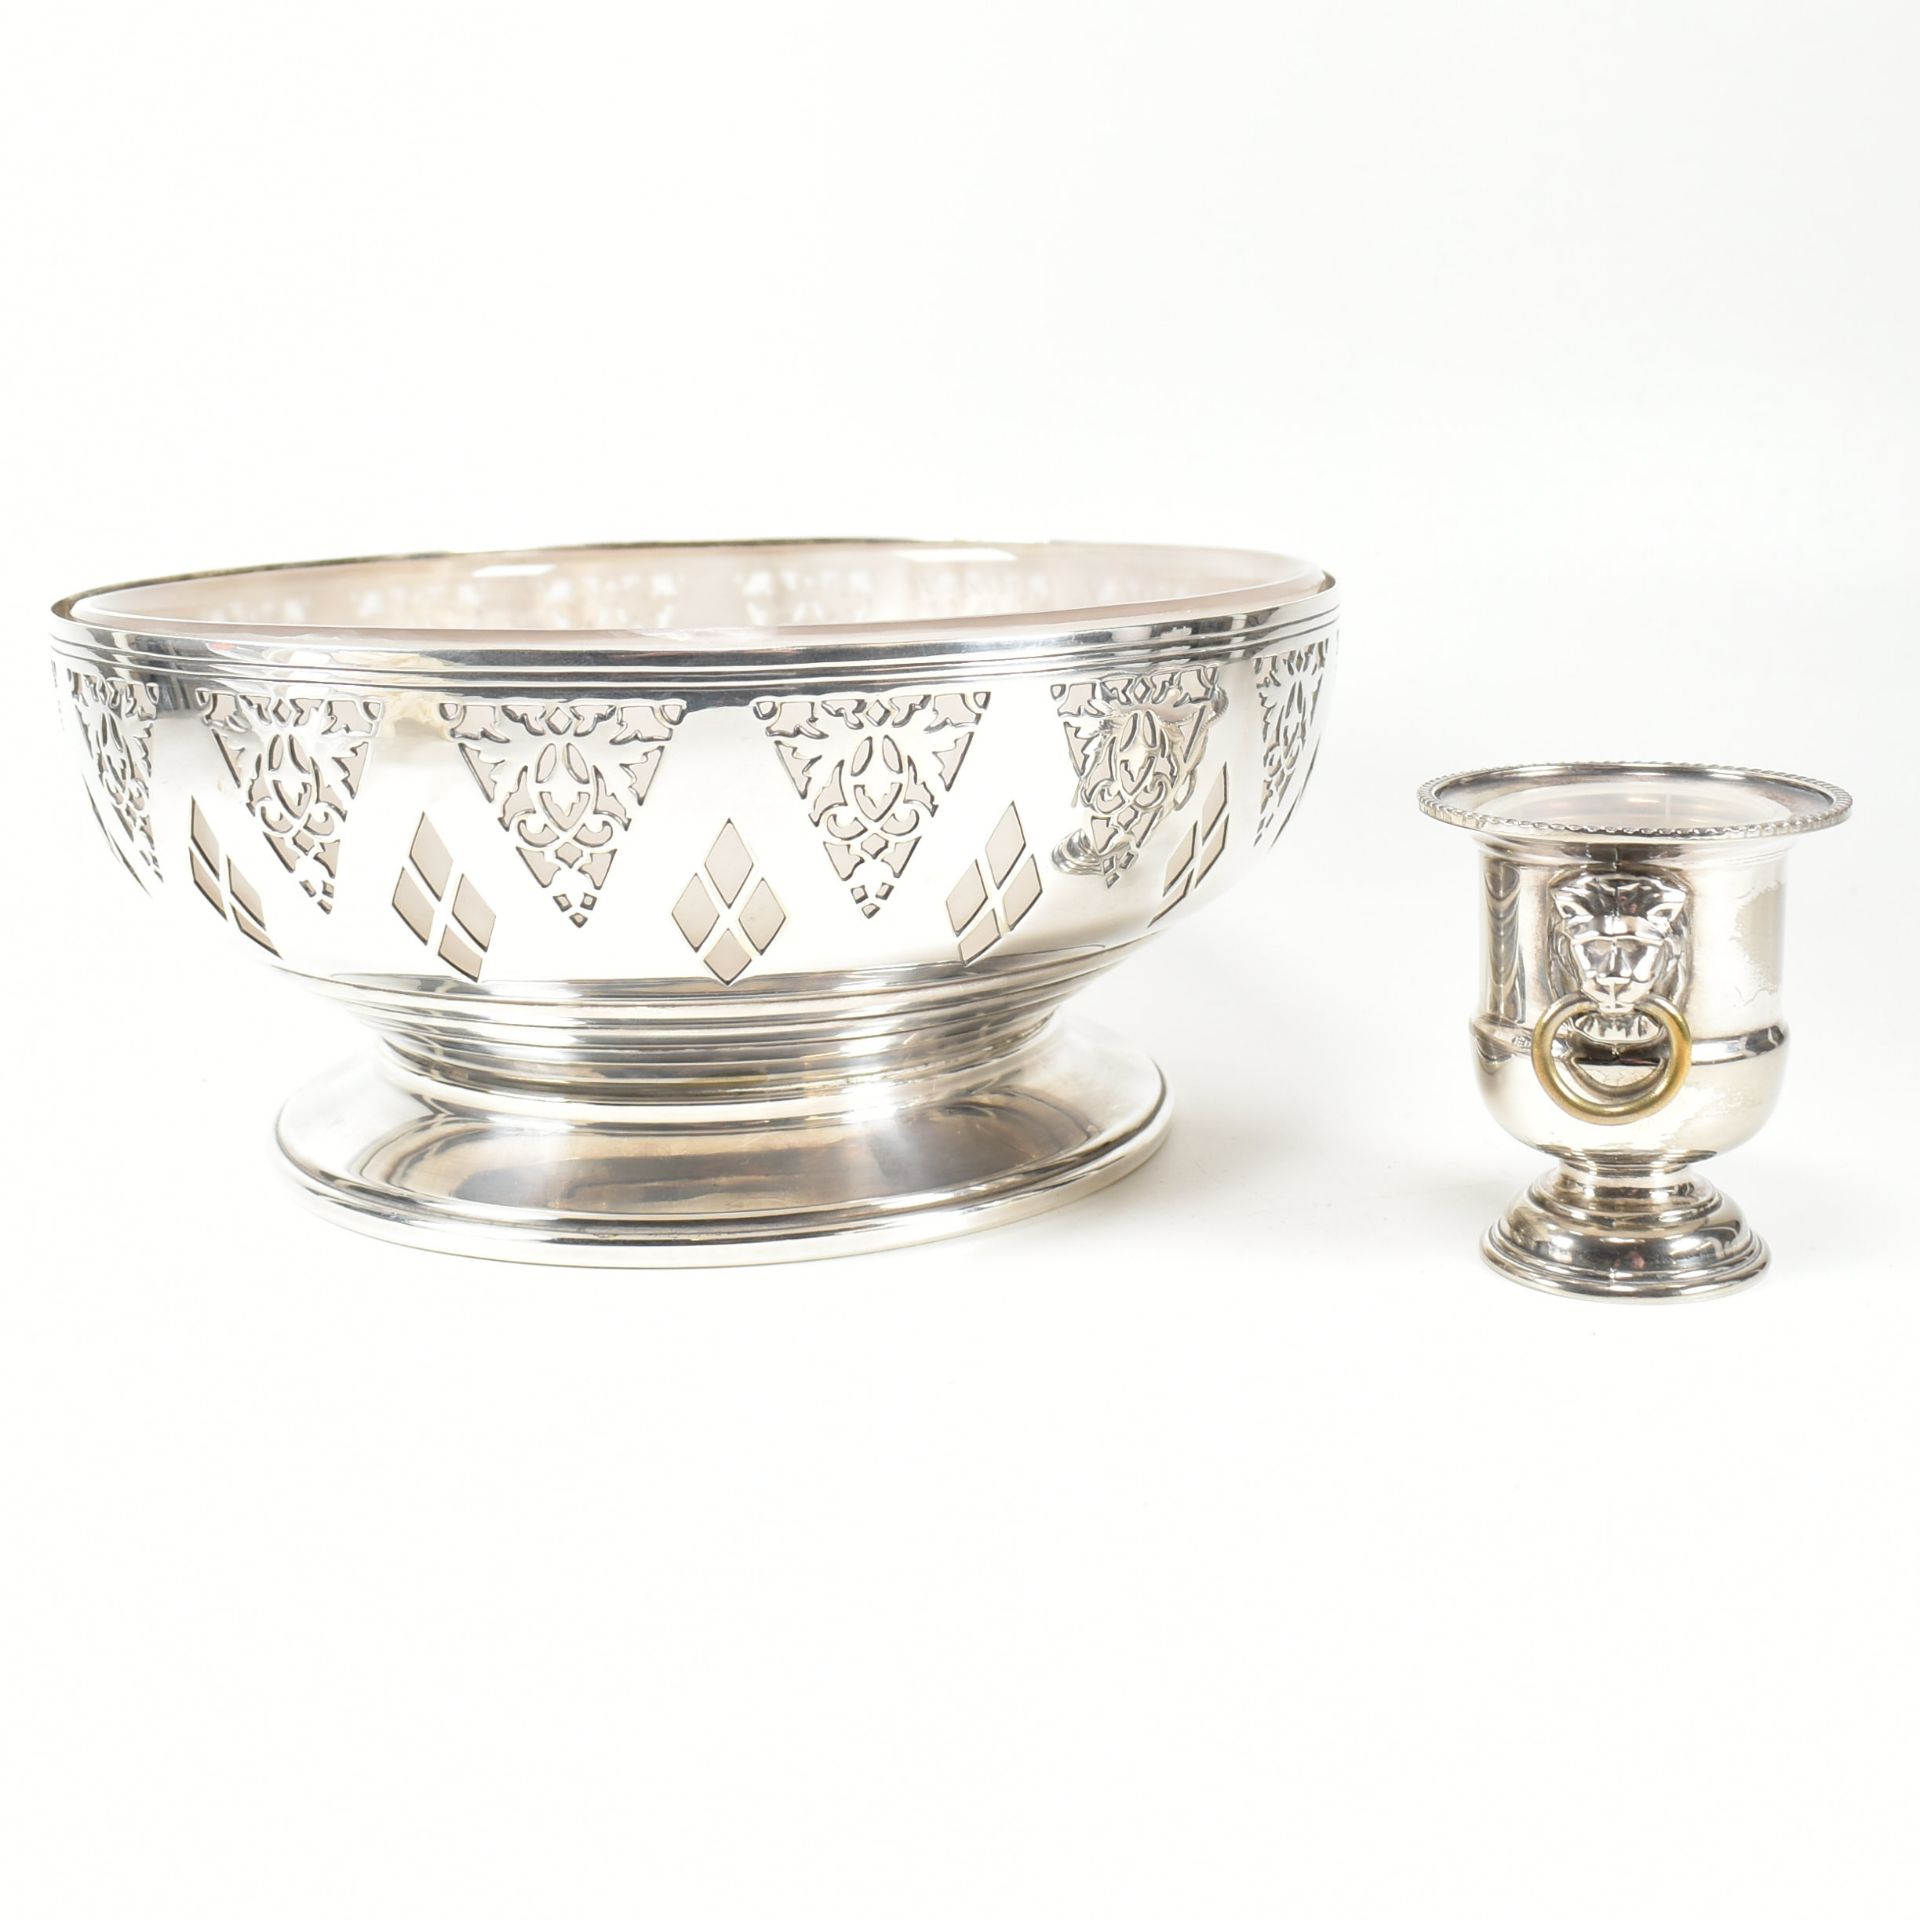 MID CENTURY MAPPIN & WEBB SILVER PLATED FRUIT BOWL & VINERS URN - Image 2 of 8